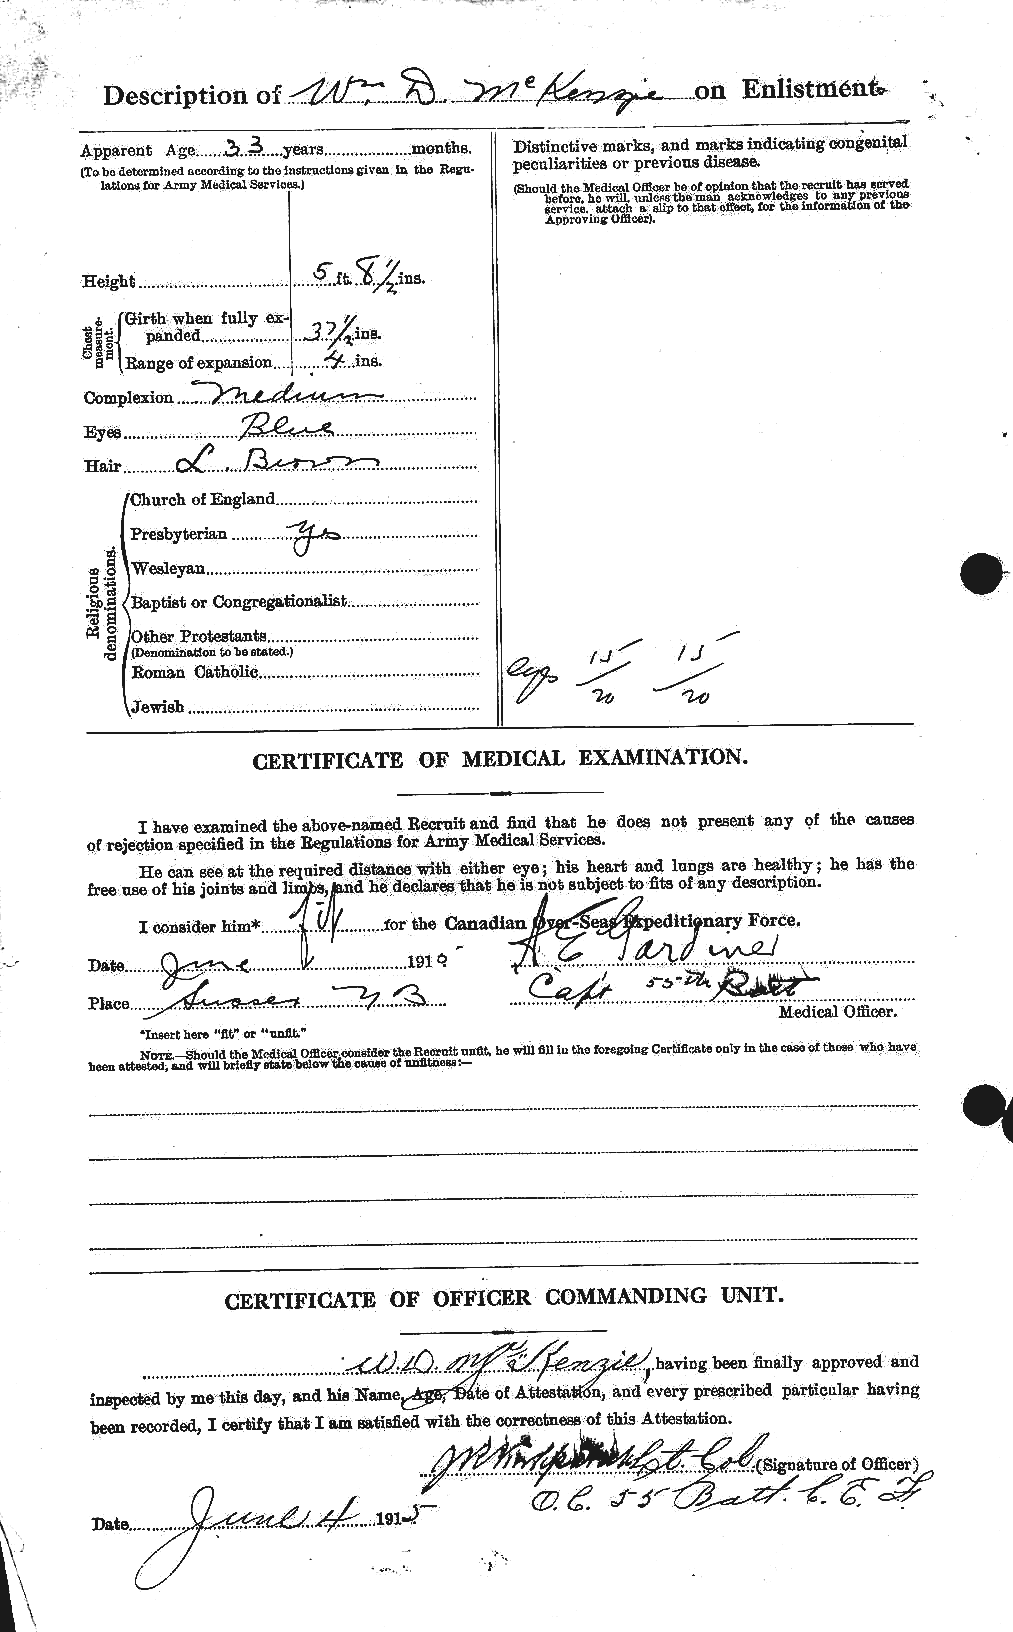 Personnel Records of the First World War - CEF 531970b